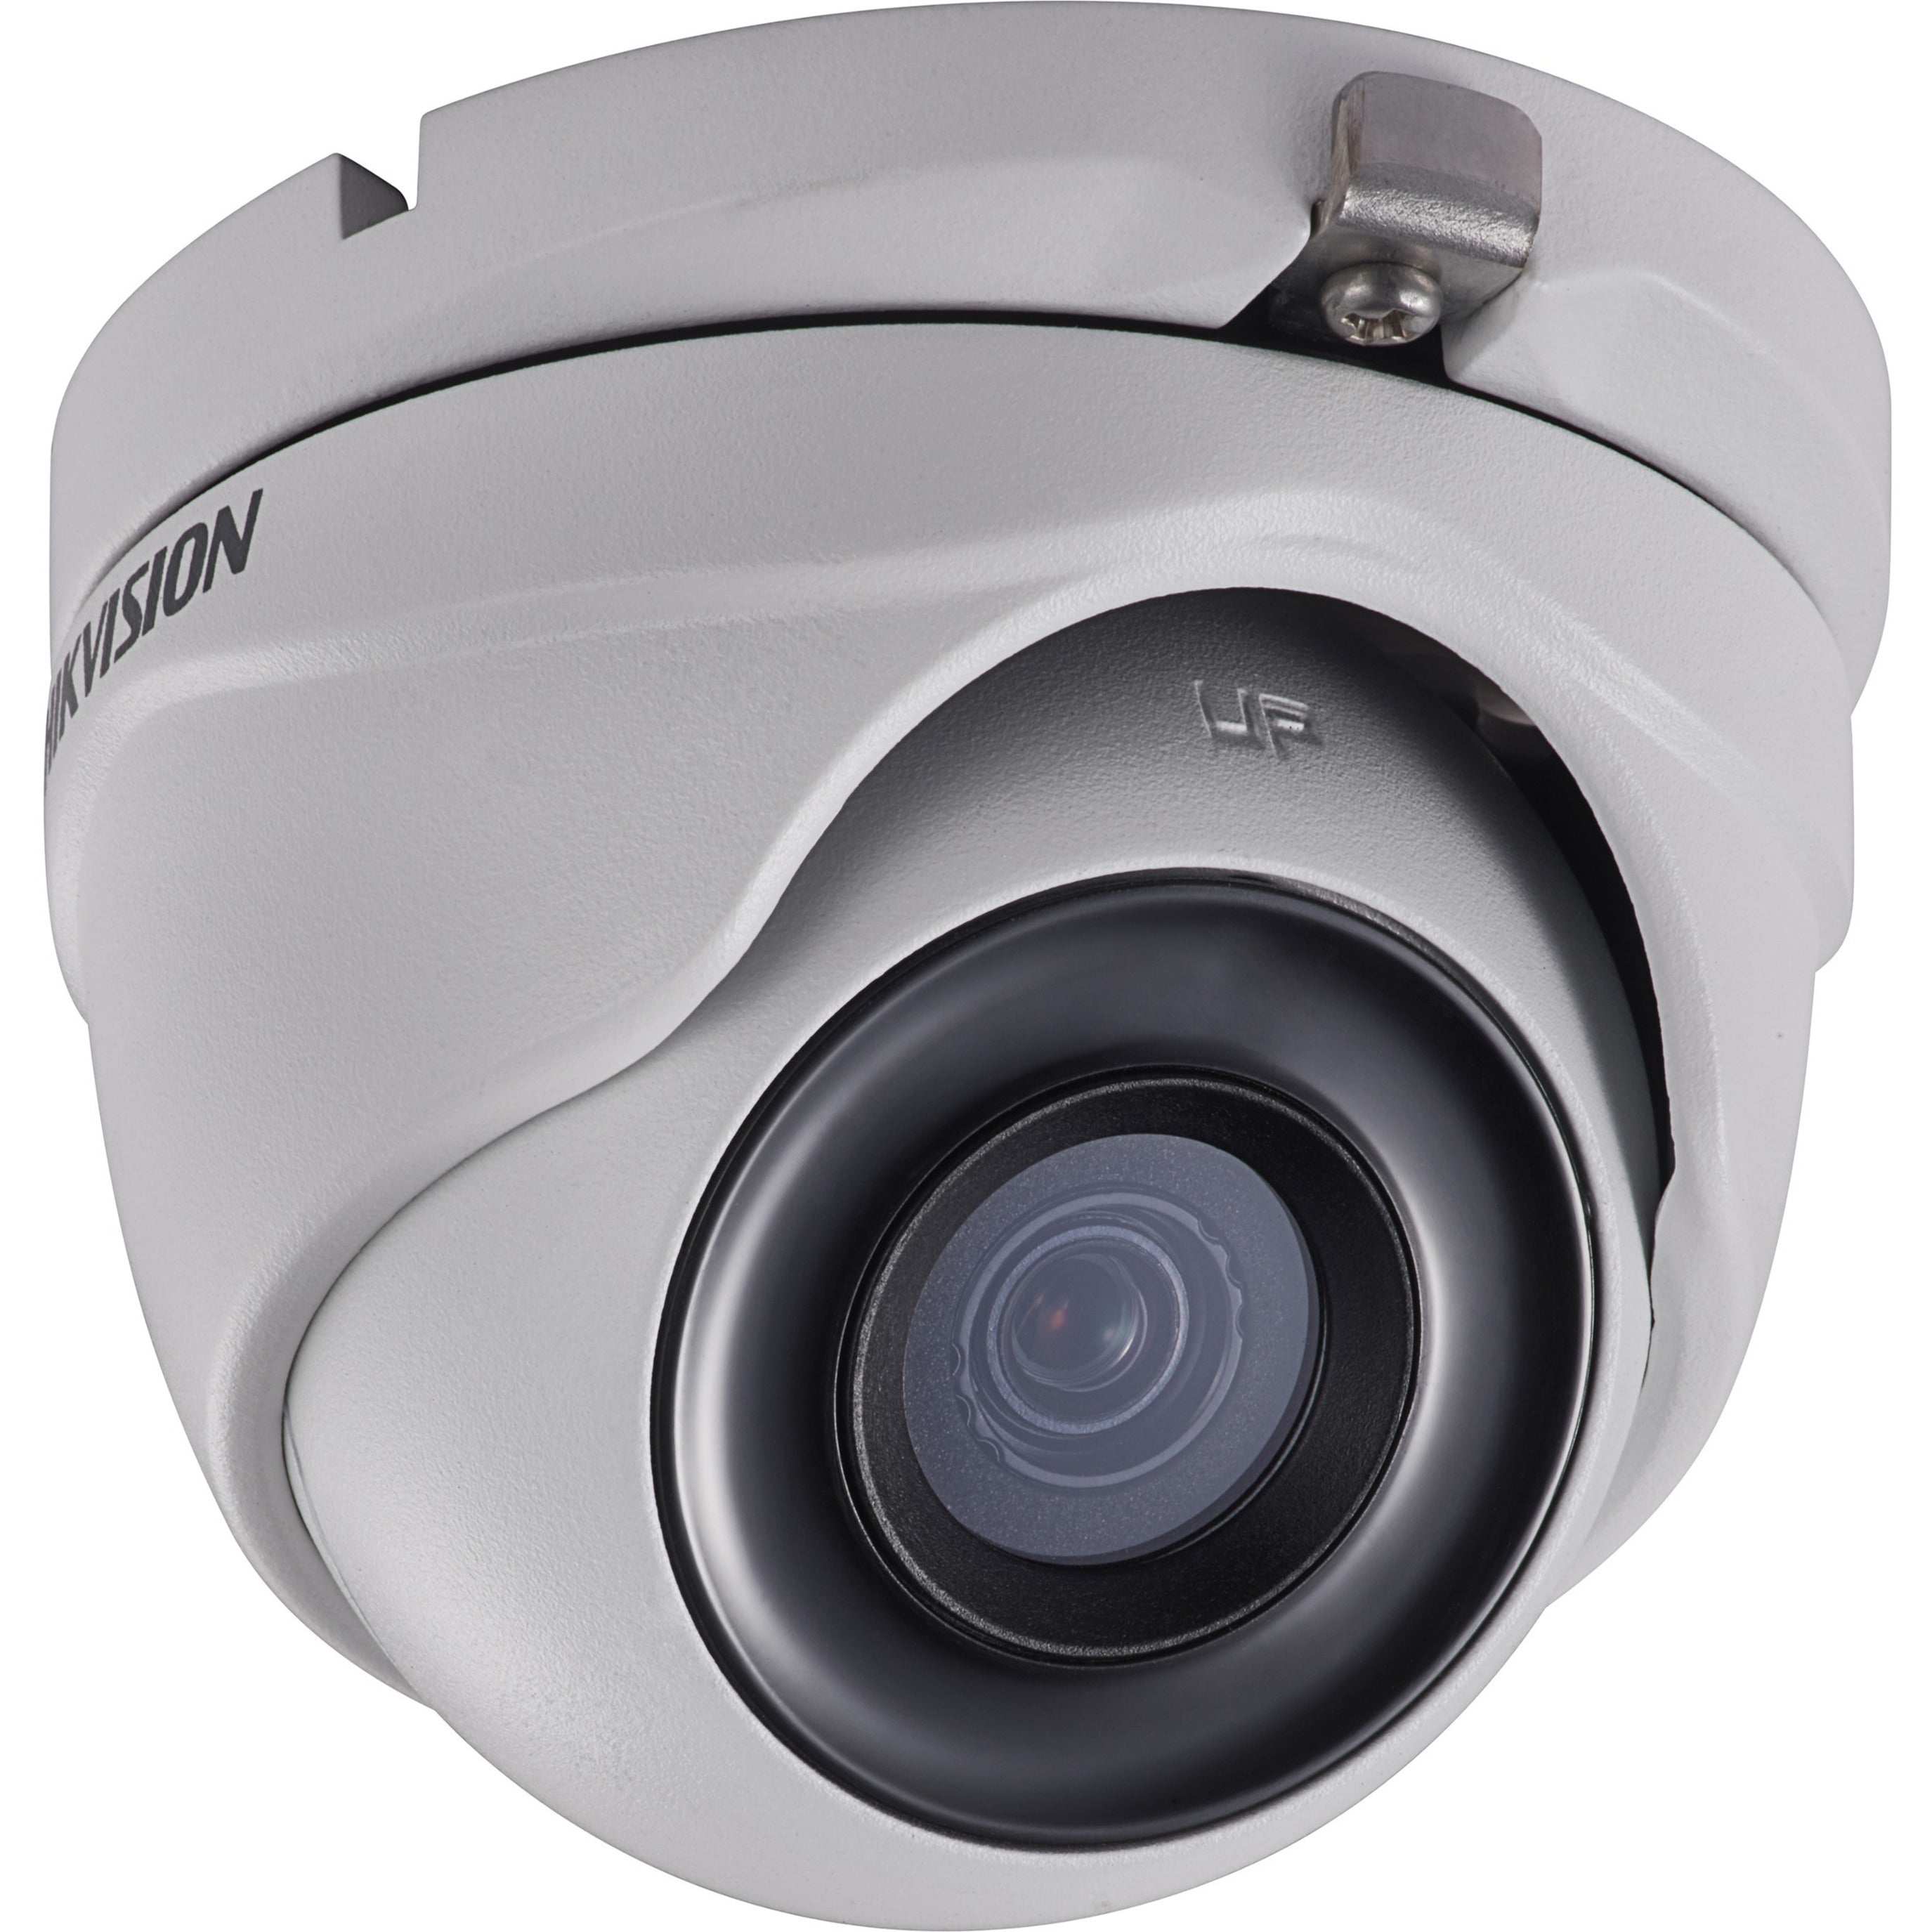 Hikvision DS-2CE76D3T-ITMF 2.8MM 2 MP Outdoor Ultra-Low Light Turret Camera Wide Dynamic Range 3D Digitales Rauschunterdrückung Back Light Compensation (BLC) Highlight Compensation (HLC) Day/Night IP67